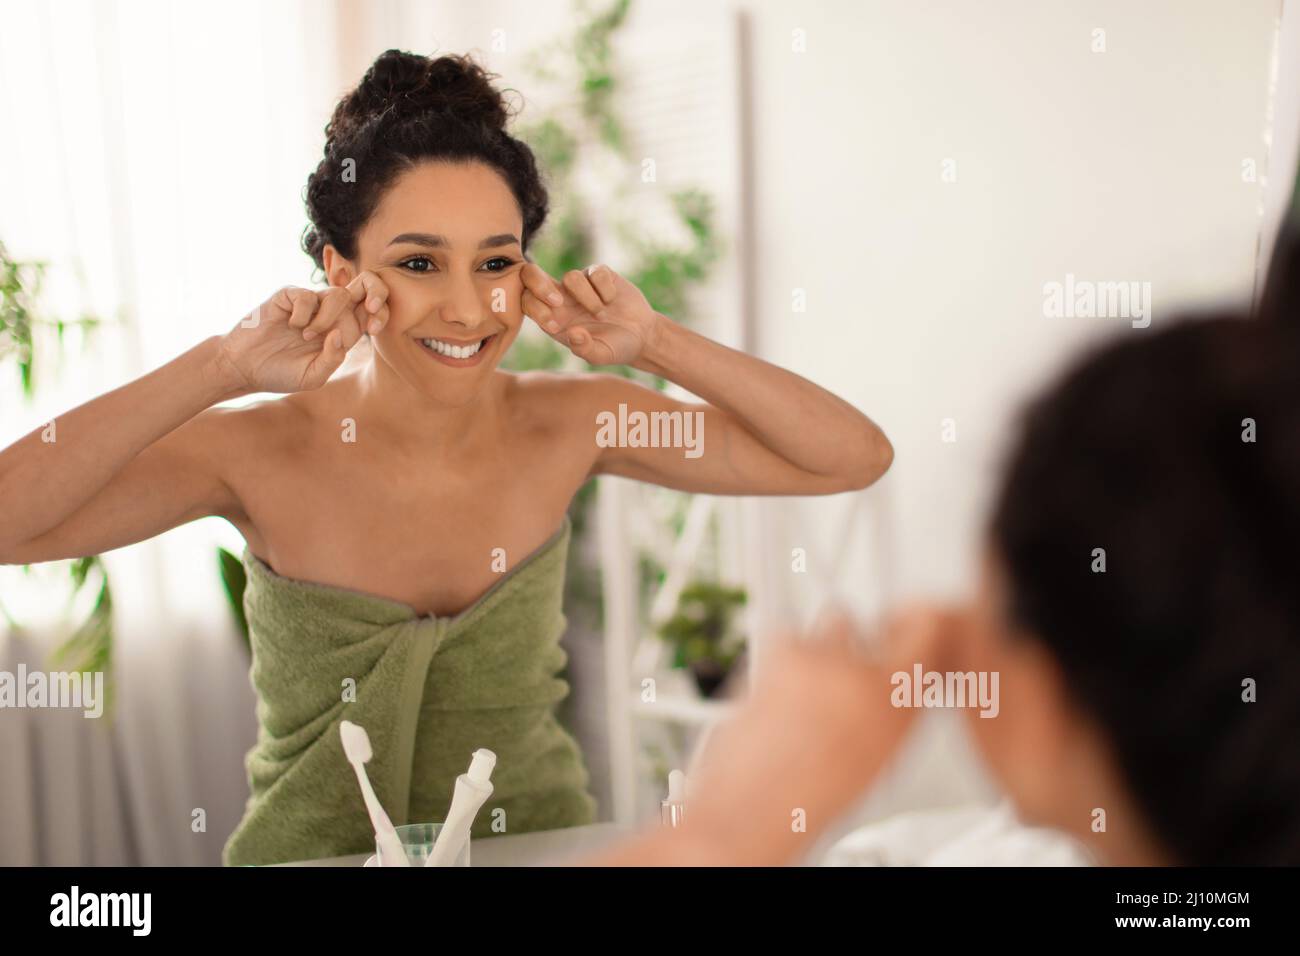 Lovely young woman making lymphatic drainage facial self massage near mirror at home, free space Stock Photo